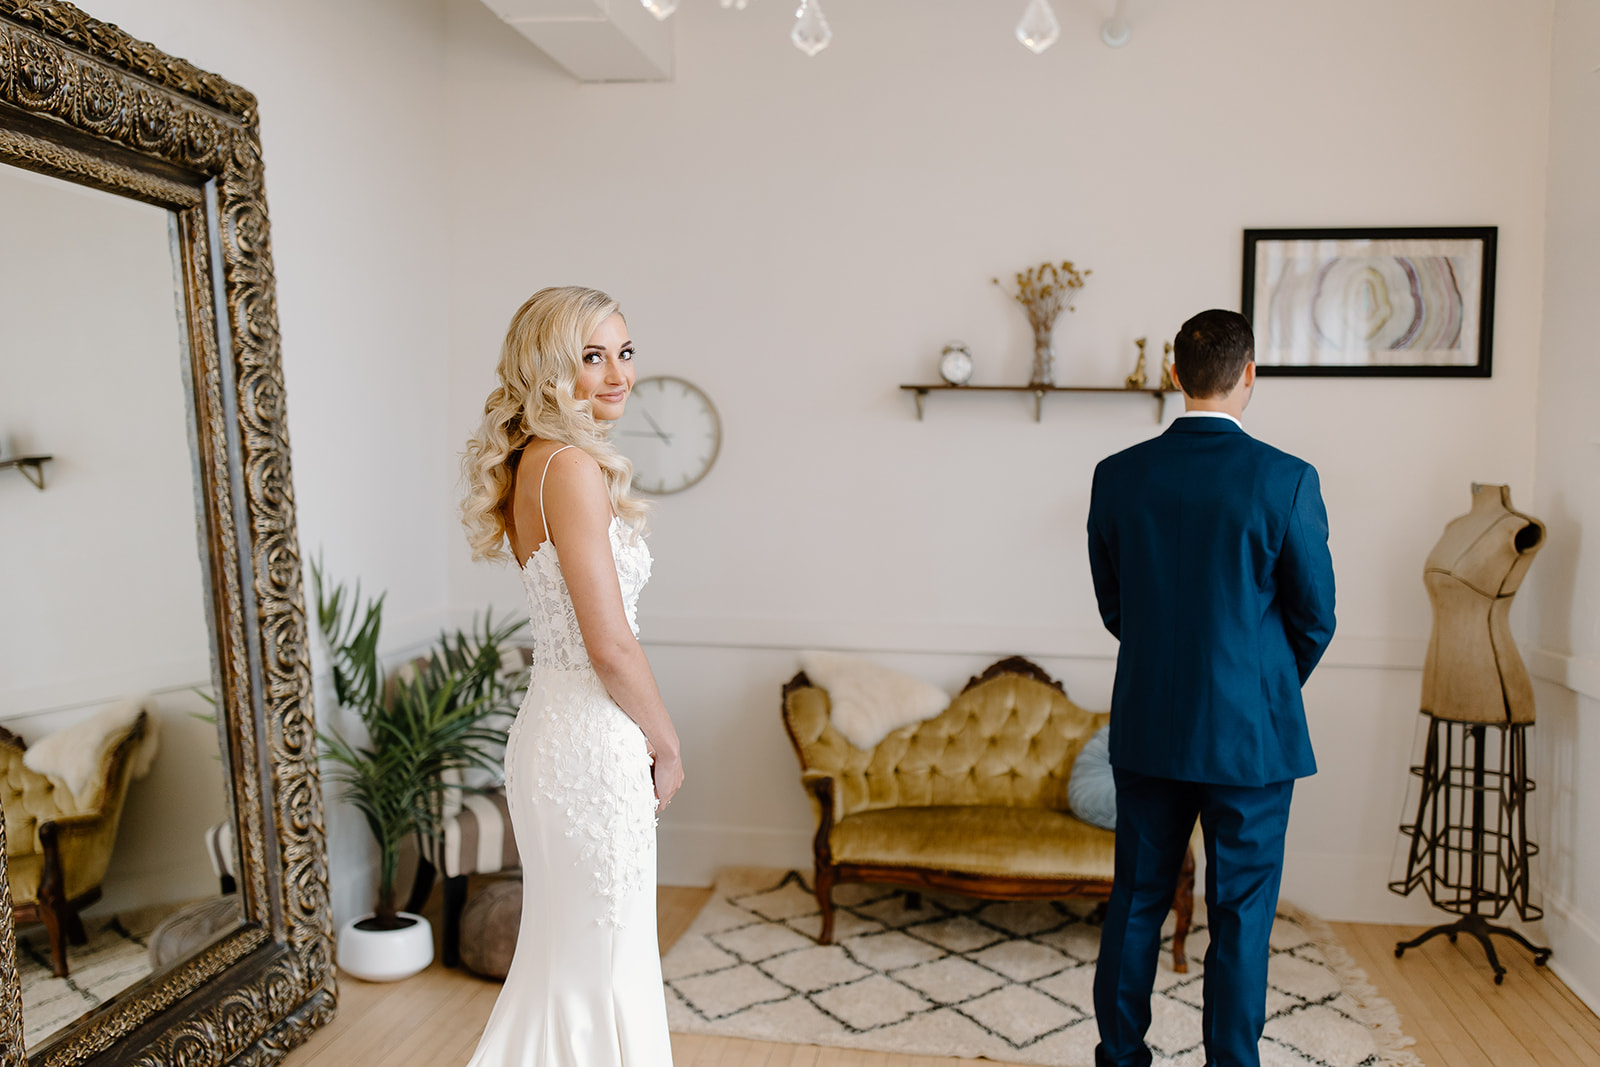 Bride looks over her shoulder at the camera while her groom is waiting to see her for the first time.